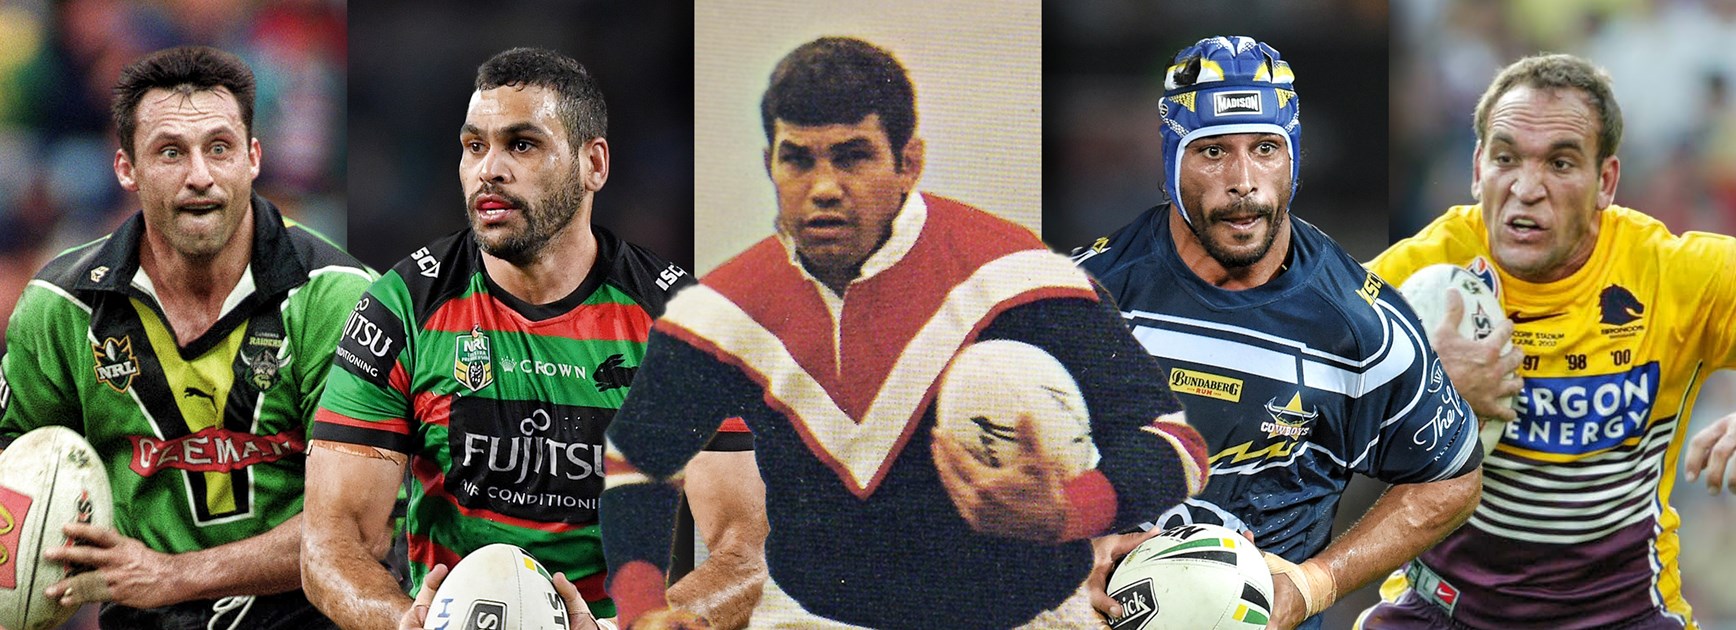 Thurston voted rugby league's greatest Indigenous player